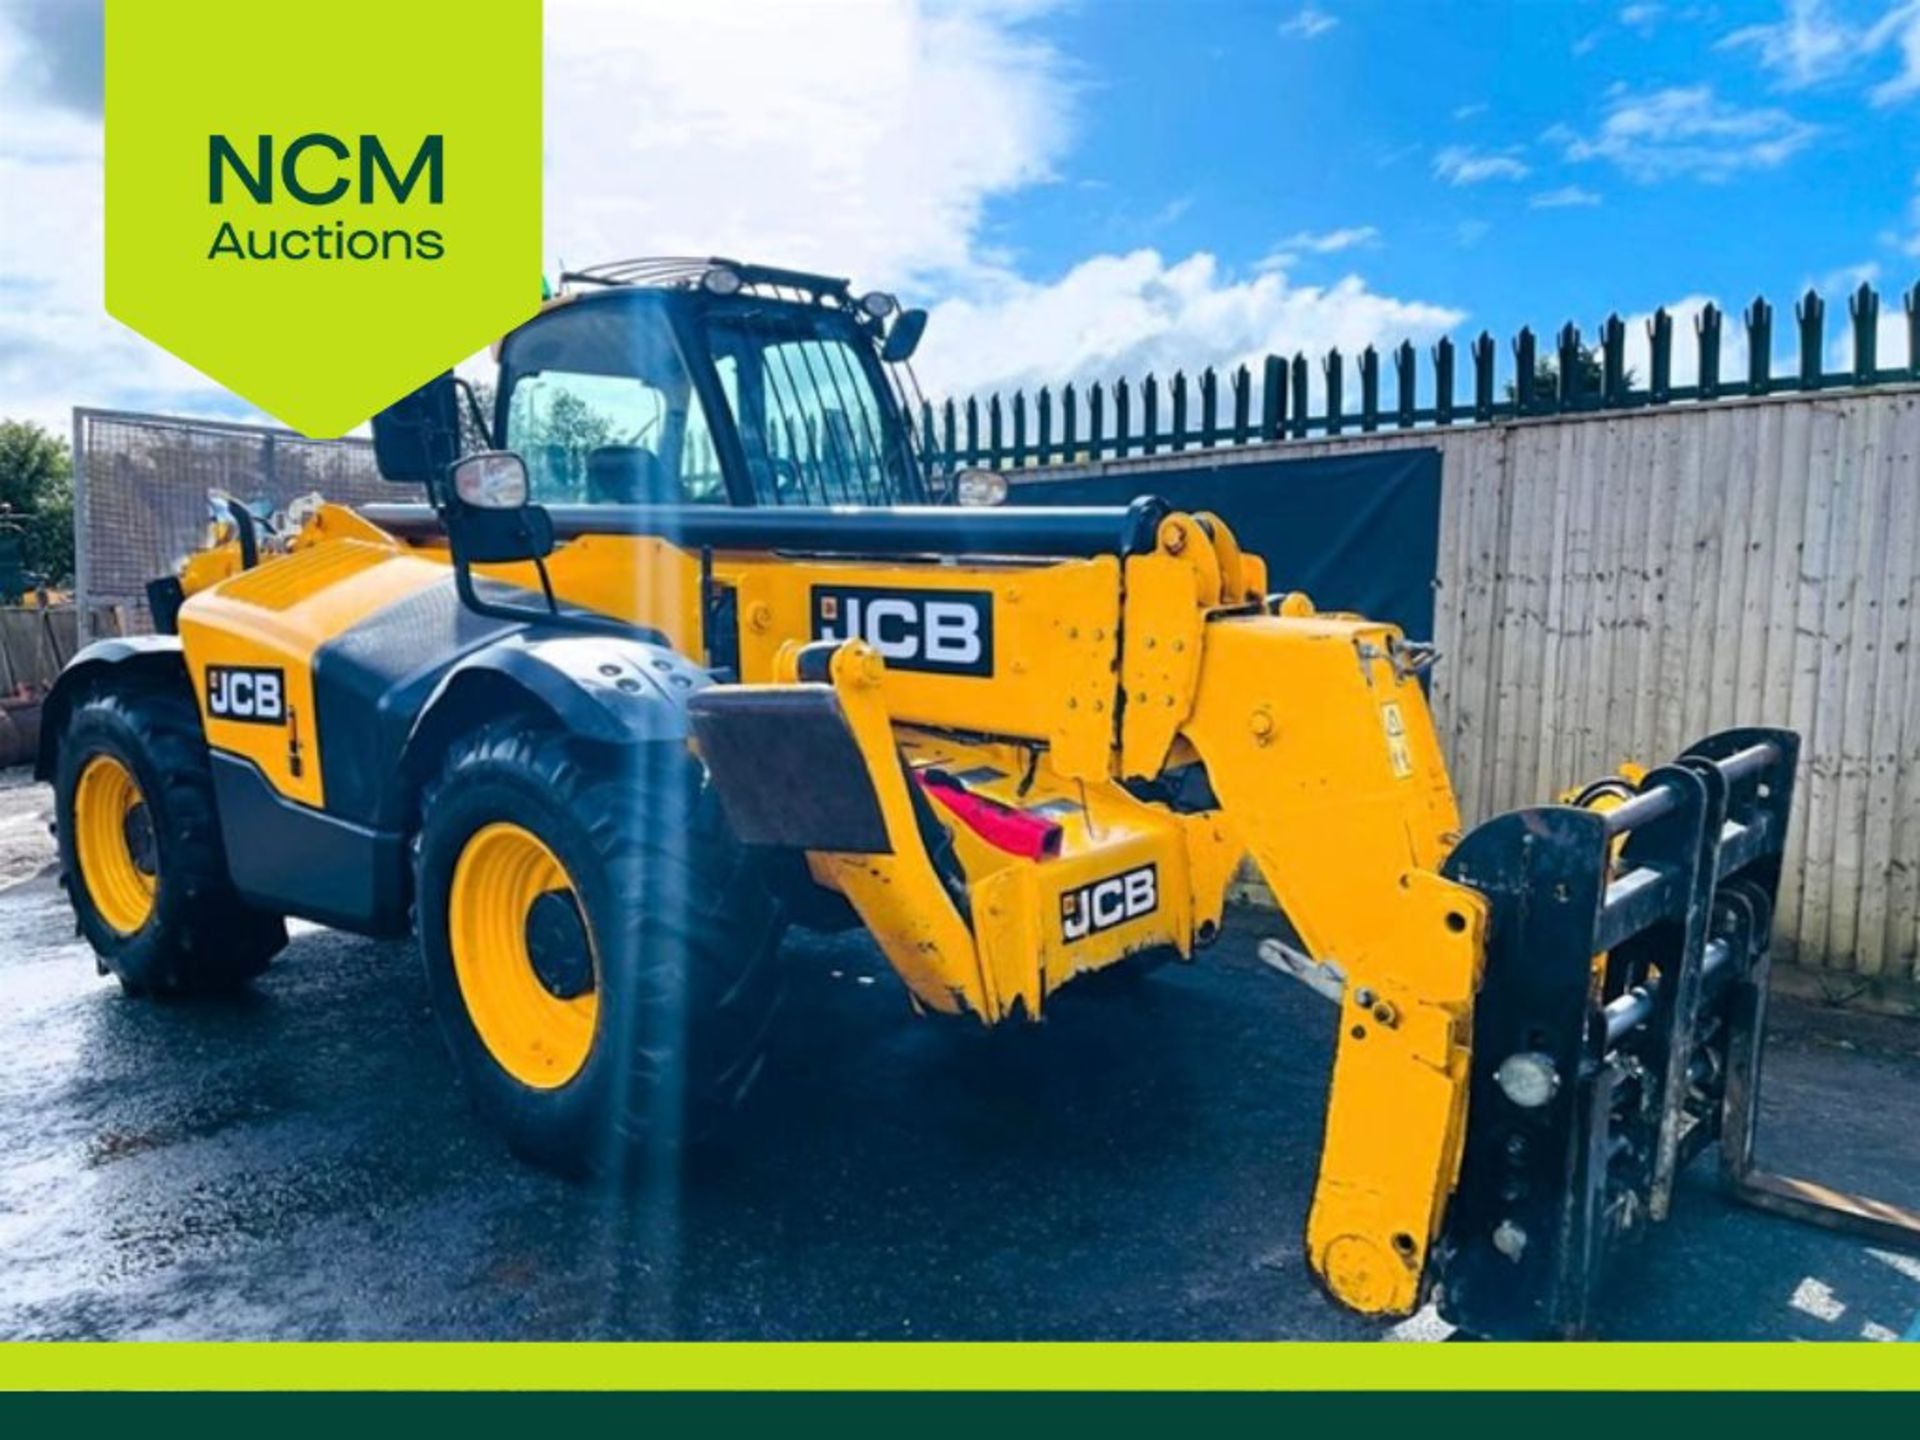 Sell your Plant, Machinery, Commercial Vehicles & Industrial Assets with NCM Auctions! - Image 2 of 3